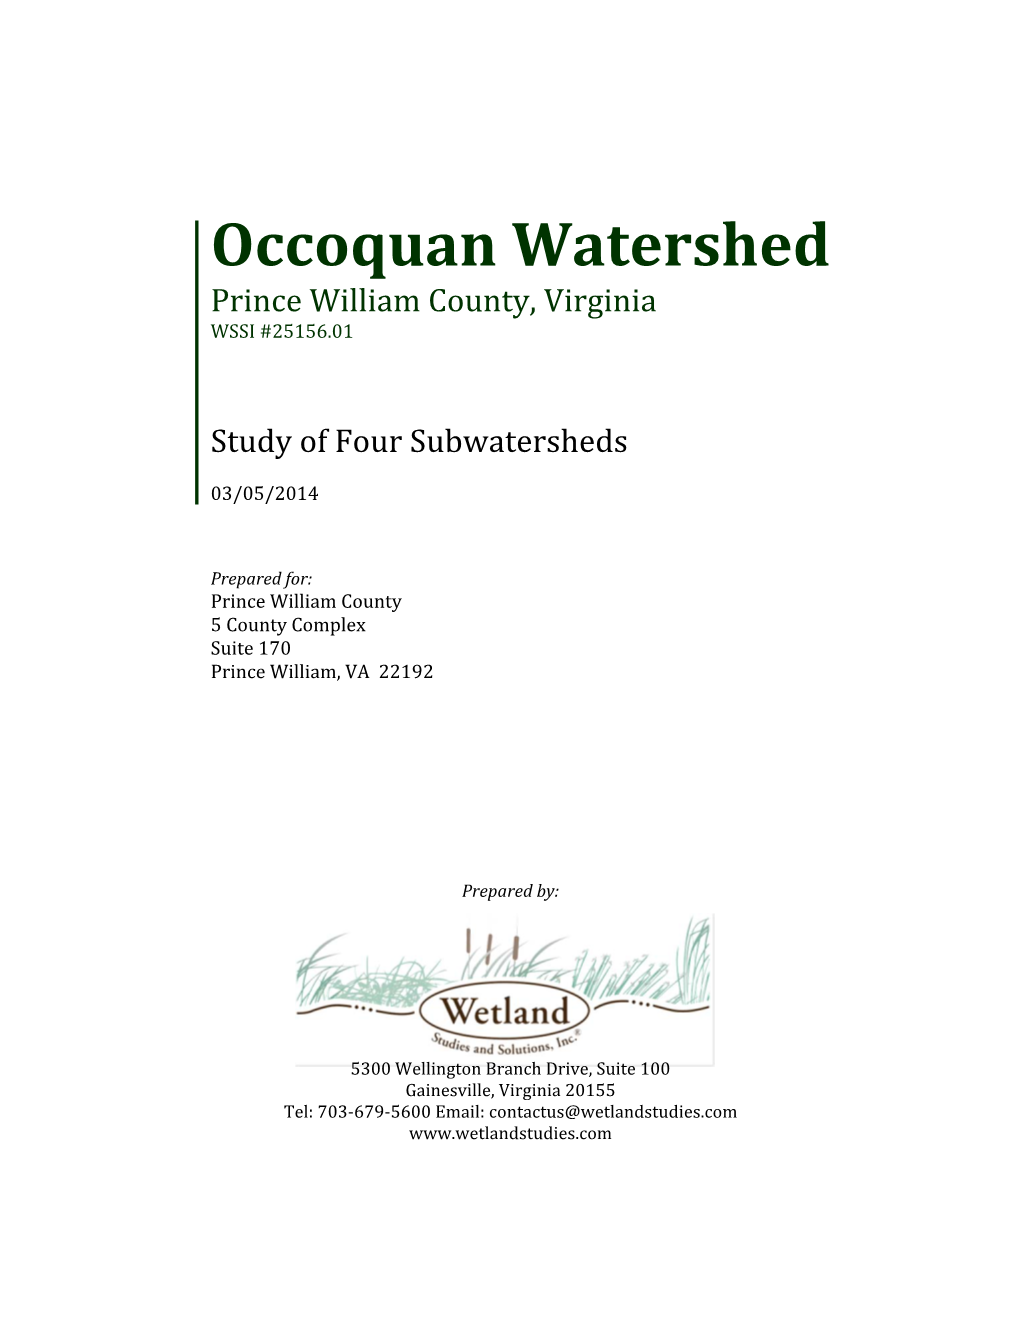 Occoquan Watershed Prince William County, Virginia WSSI #25156.01